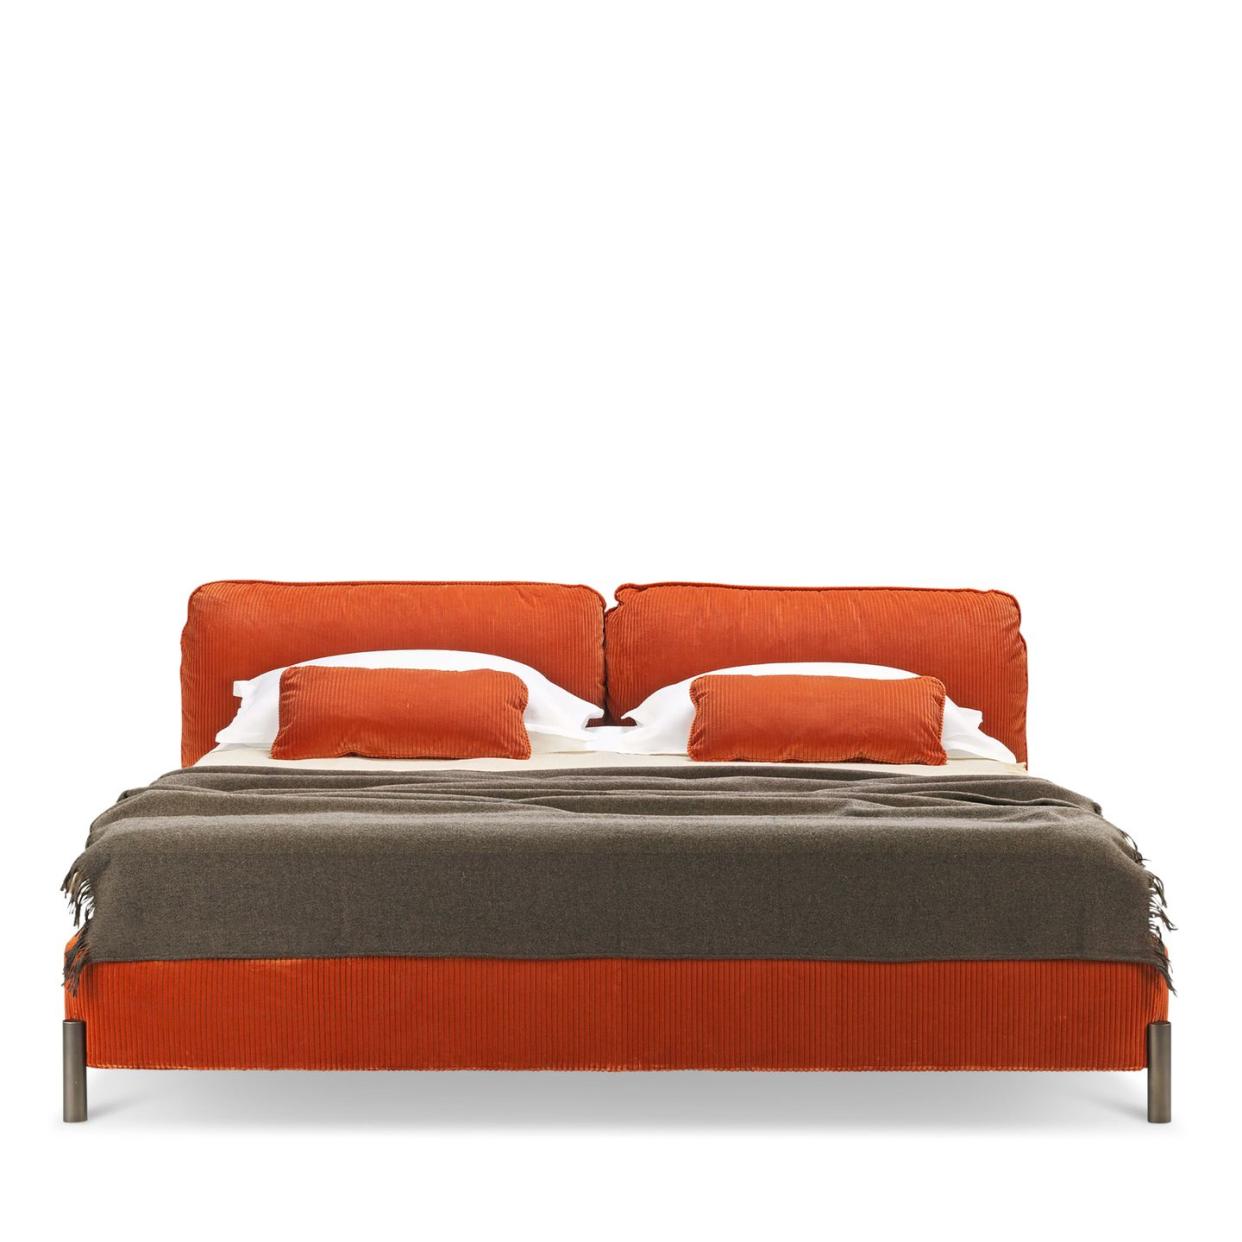 wide orange bed with brown throw